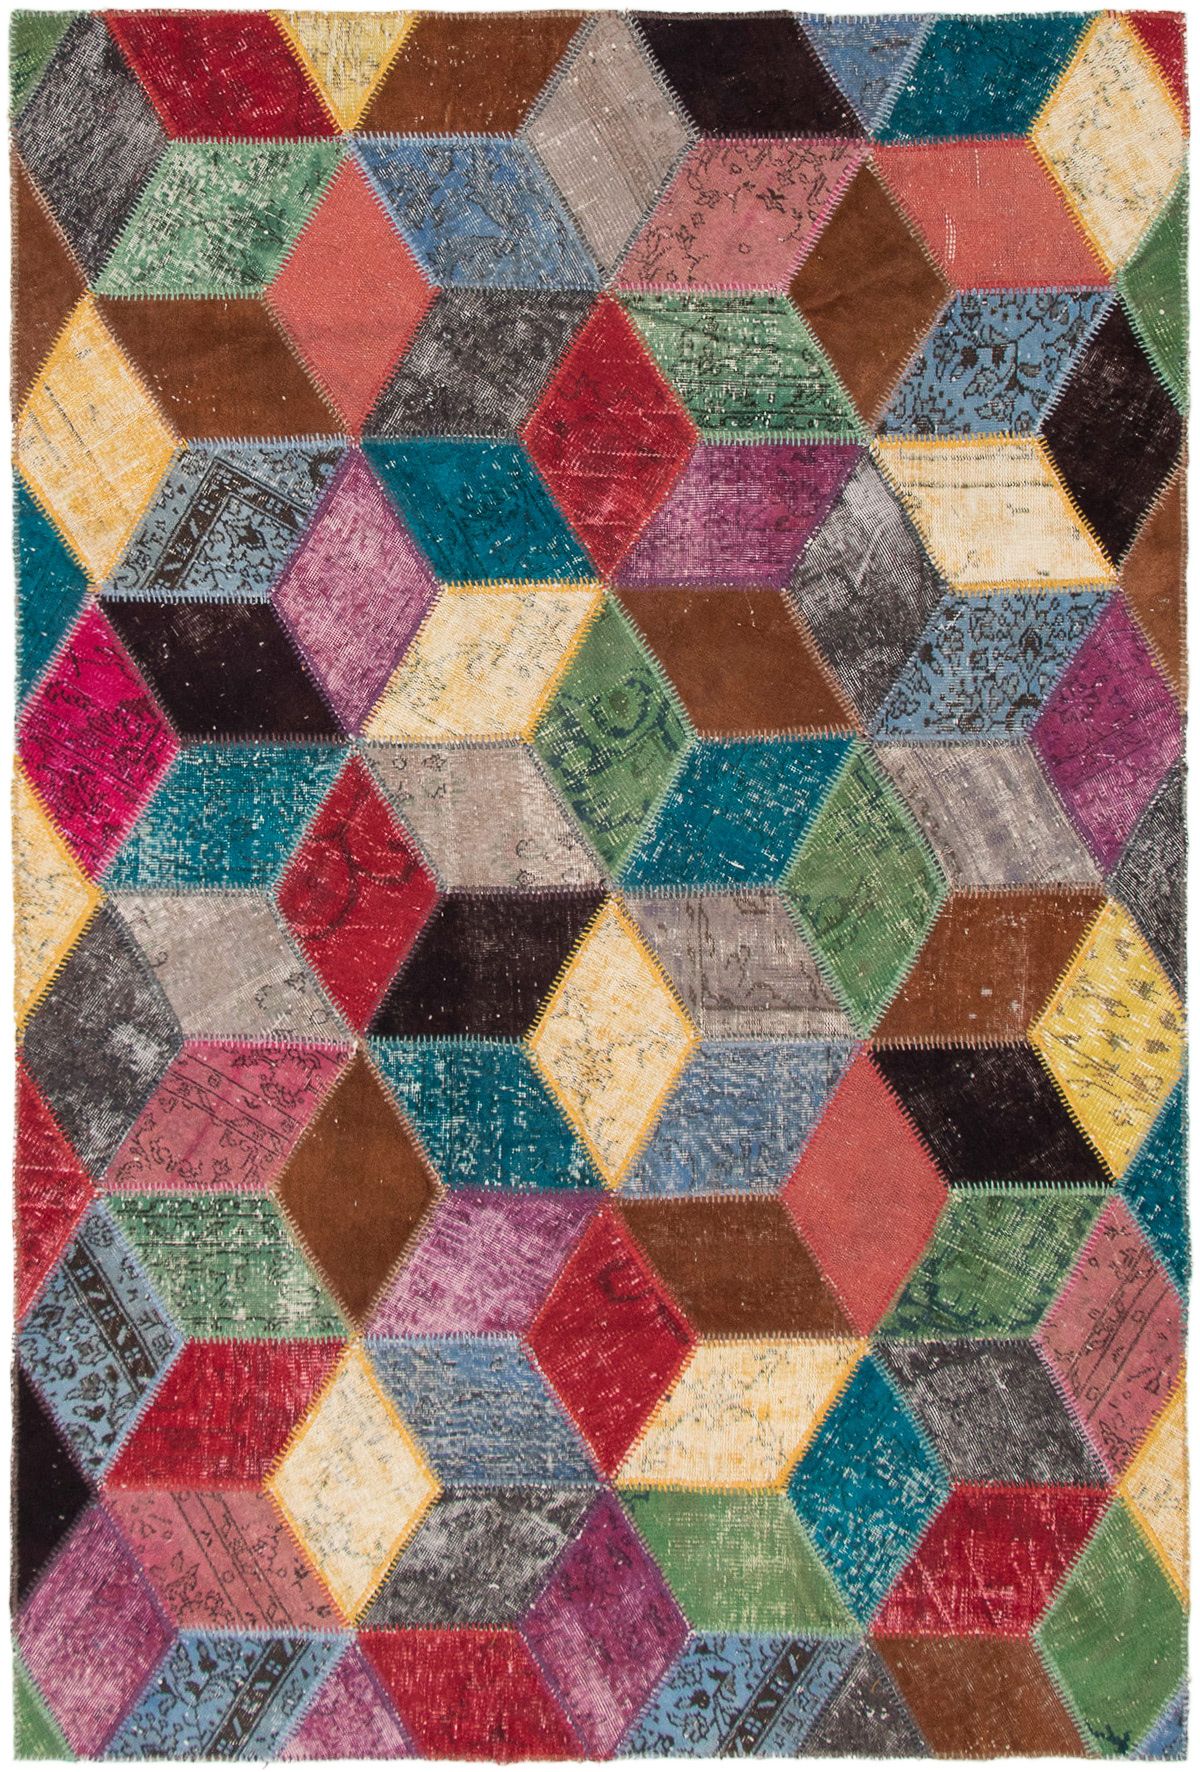 Hand-knotted Color Transition Patch Multi,  Wool Rug 6'3" x 9'8" Size: 6'3" x 9'8"  